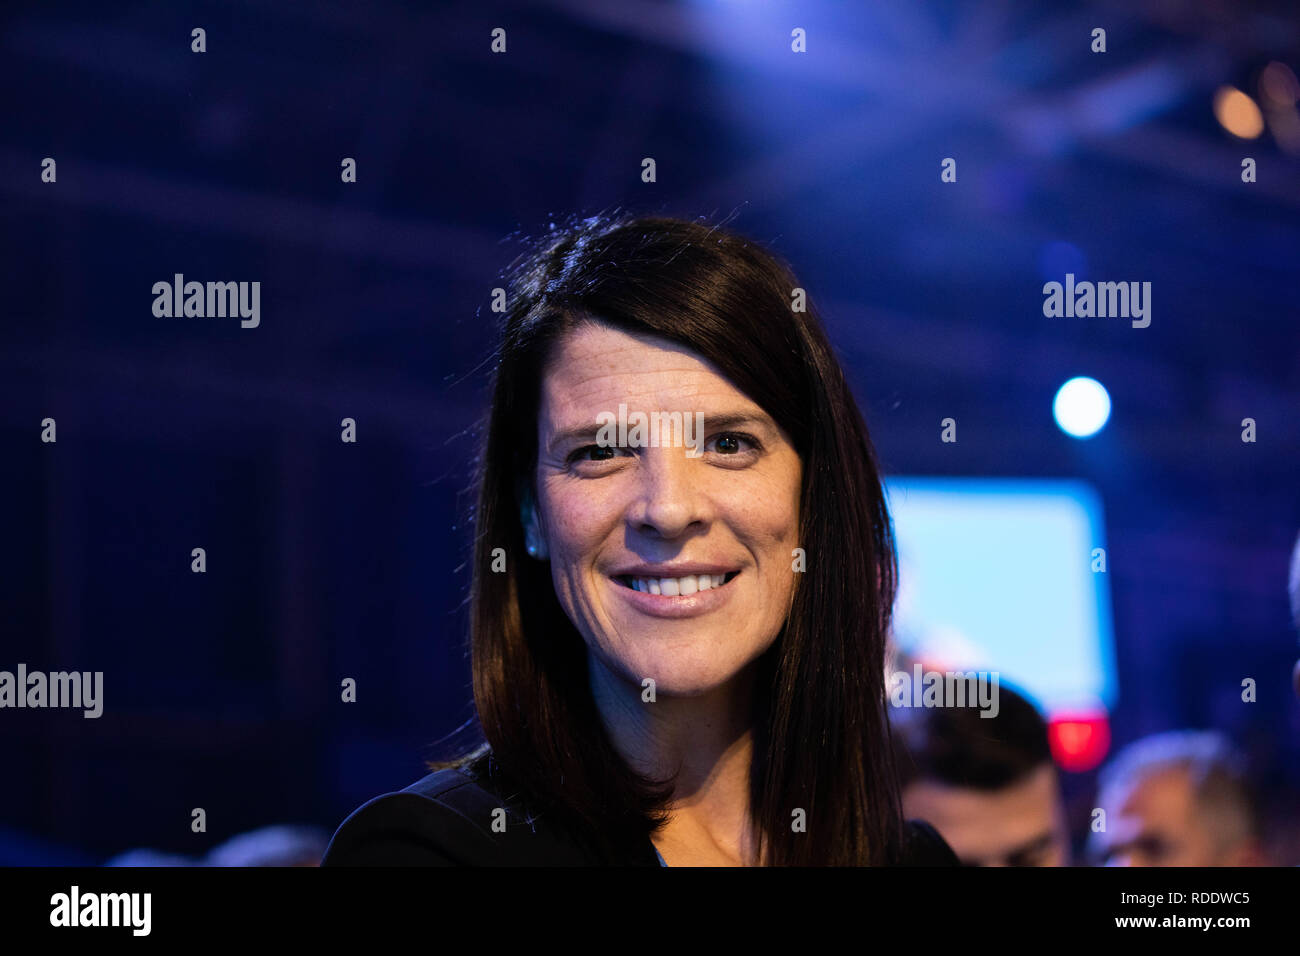 January 18, 2019 - Madrid, Spain - Ruth Beitia, Spanish athlete and secretary of Sports in the National Executive of the Popular Party. The PP celebrates its national convention to establish the main lines of its electoral program for the three elections scheduled for May 26 and are key to gauge the leadership of the popular president, Pablo Casado. (Credit Image: © Jesus Hellin/ZUMA Wire) Stock Photo